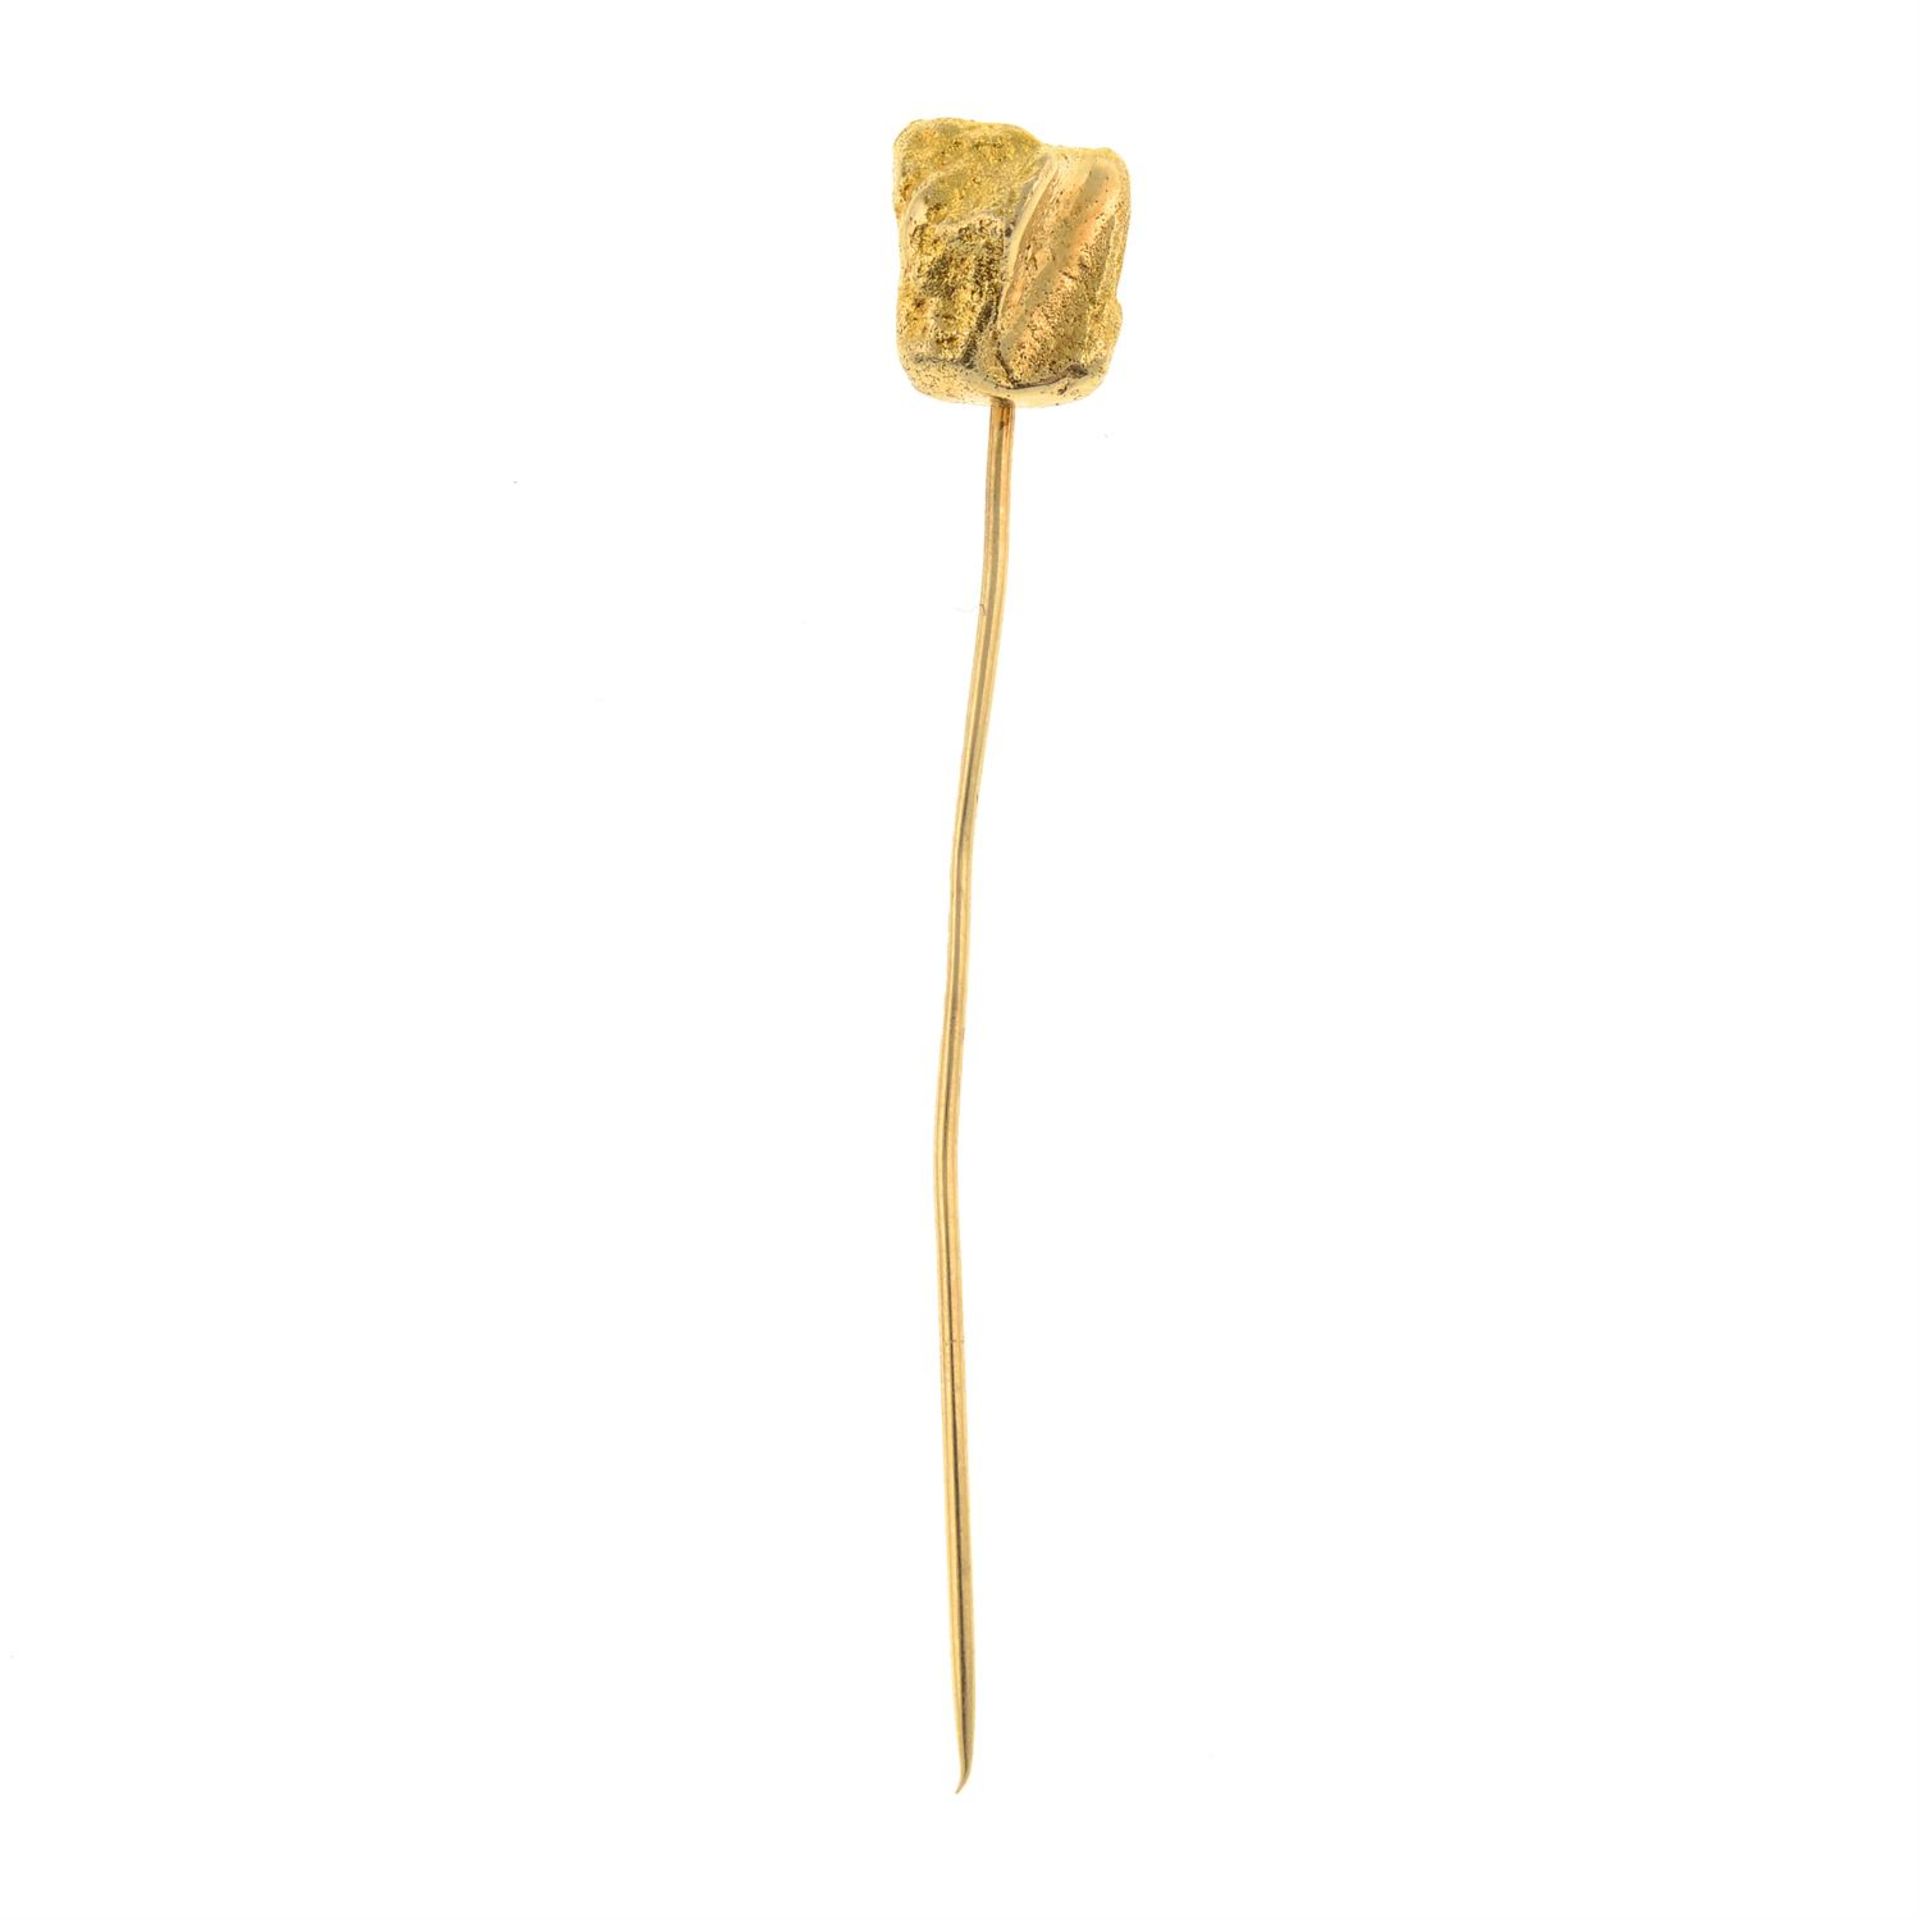 Mid 20th century 14ct gold stickpin, by Lapponia